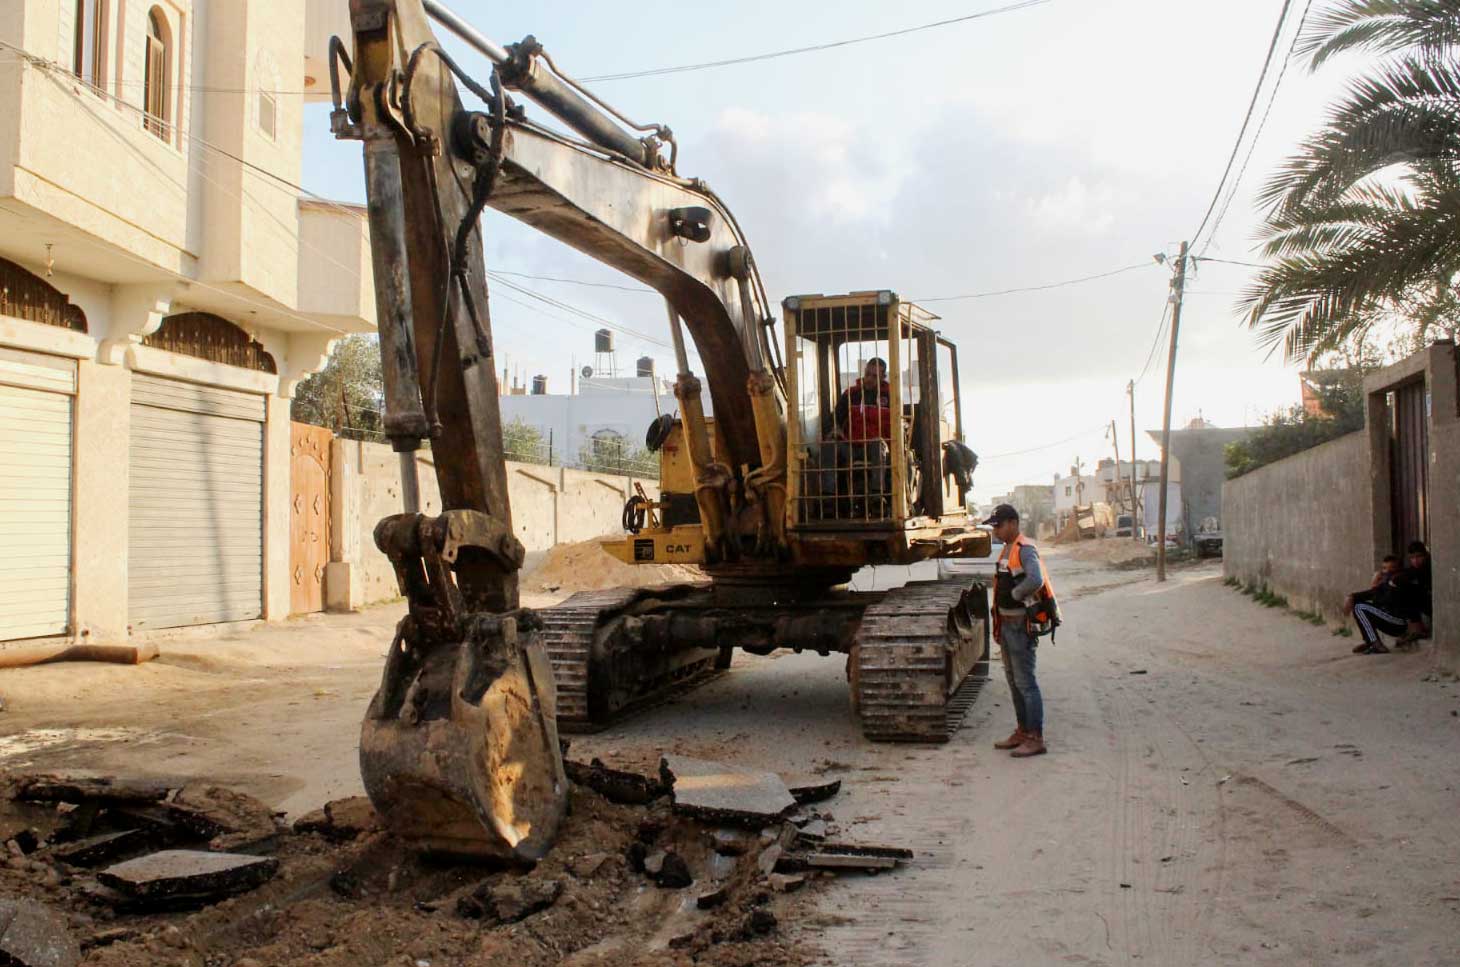 Anera contractors use an excavator to remove the asphalt on a street in Bani Suhaila, Gaza.